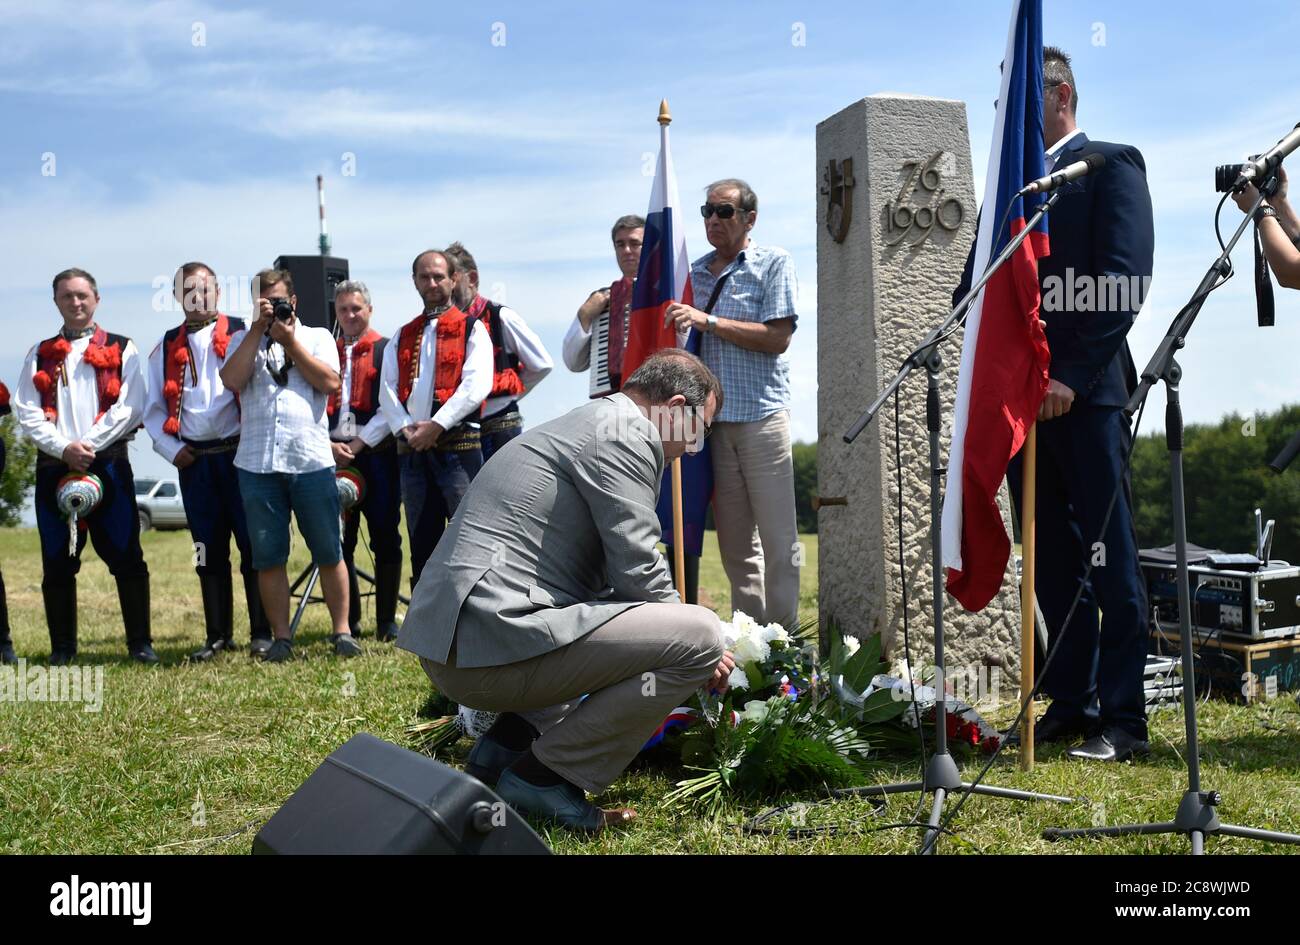 Strani, Czech Republic. 26th July, 2020. Uherske Hradiste Mayor Stanislav Blaha lays flowers to a memorial during the commemorative meeting of brotherhood of Czechs and Slovaks in limited form over coronavirus epidemiological situation took place at memorial on Velka Javorina peak, White Carpathian Mountains, July 26, 2020. Credit: Dalibor Gluck/CTK Photo/Alamy Live News Stock Photo